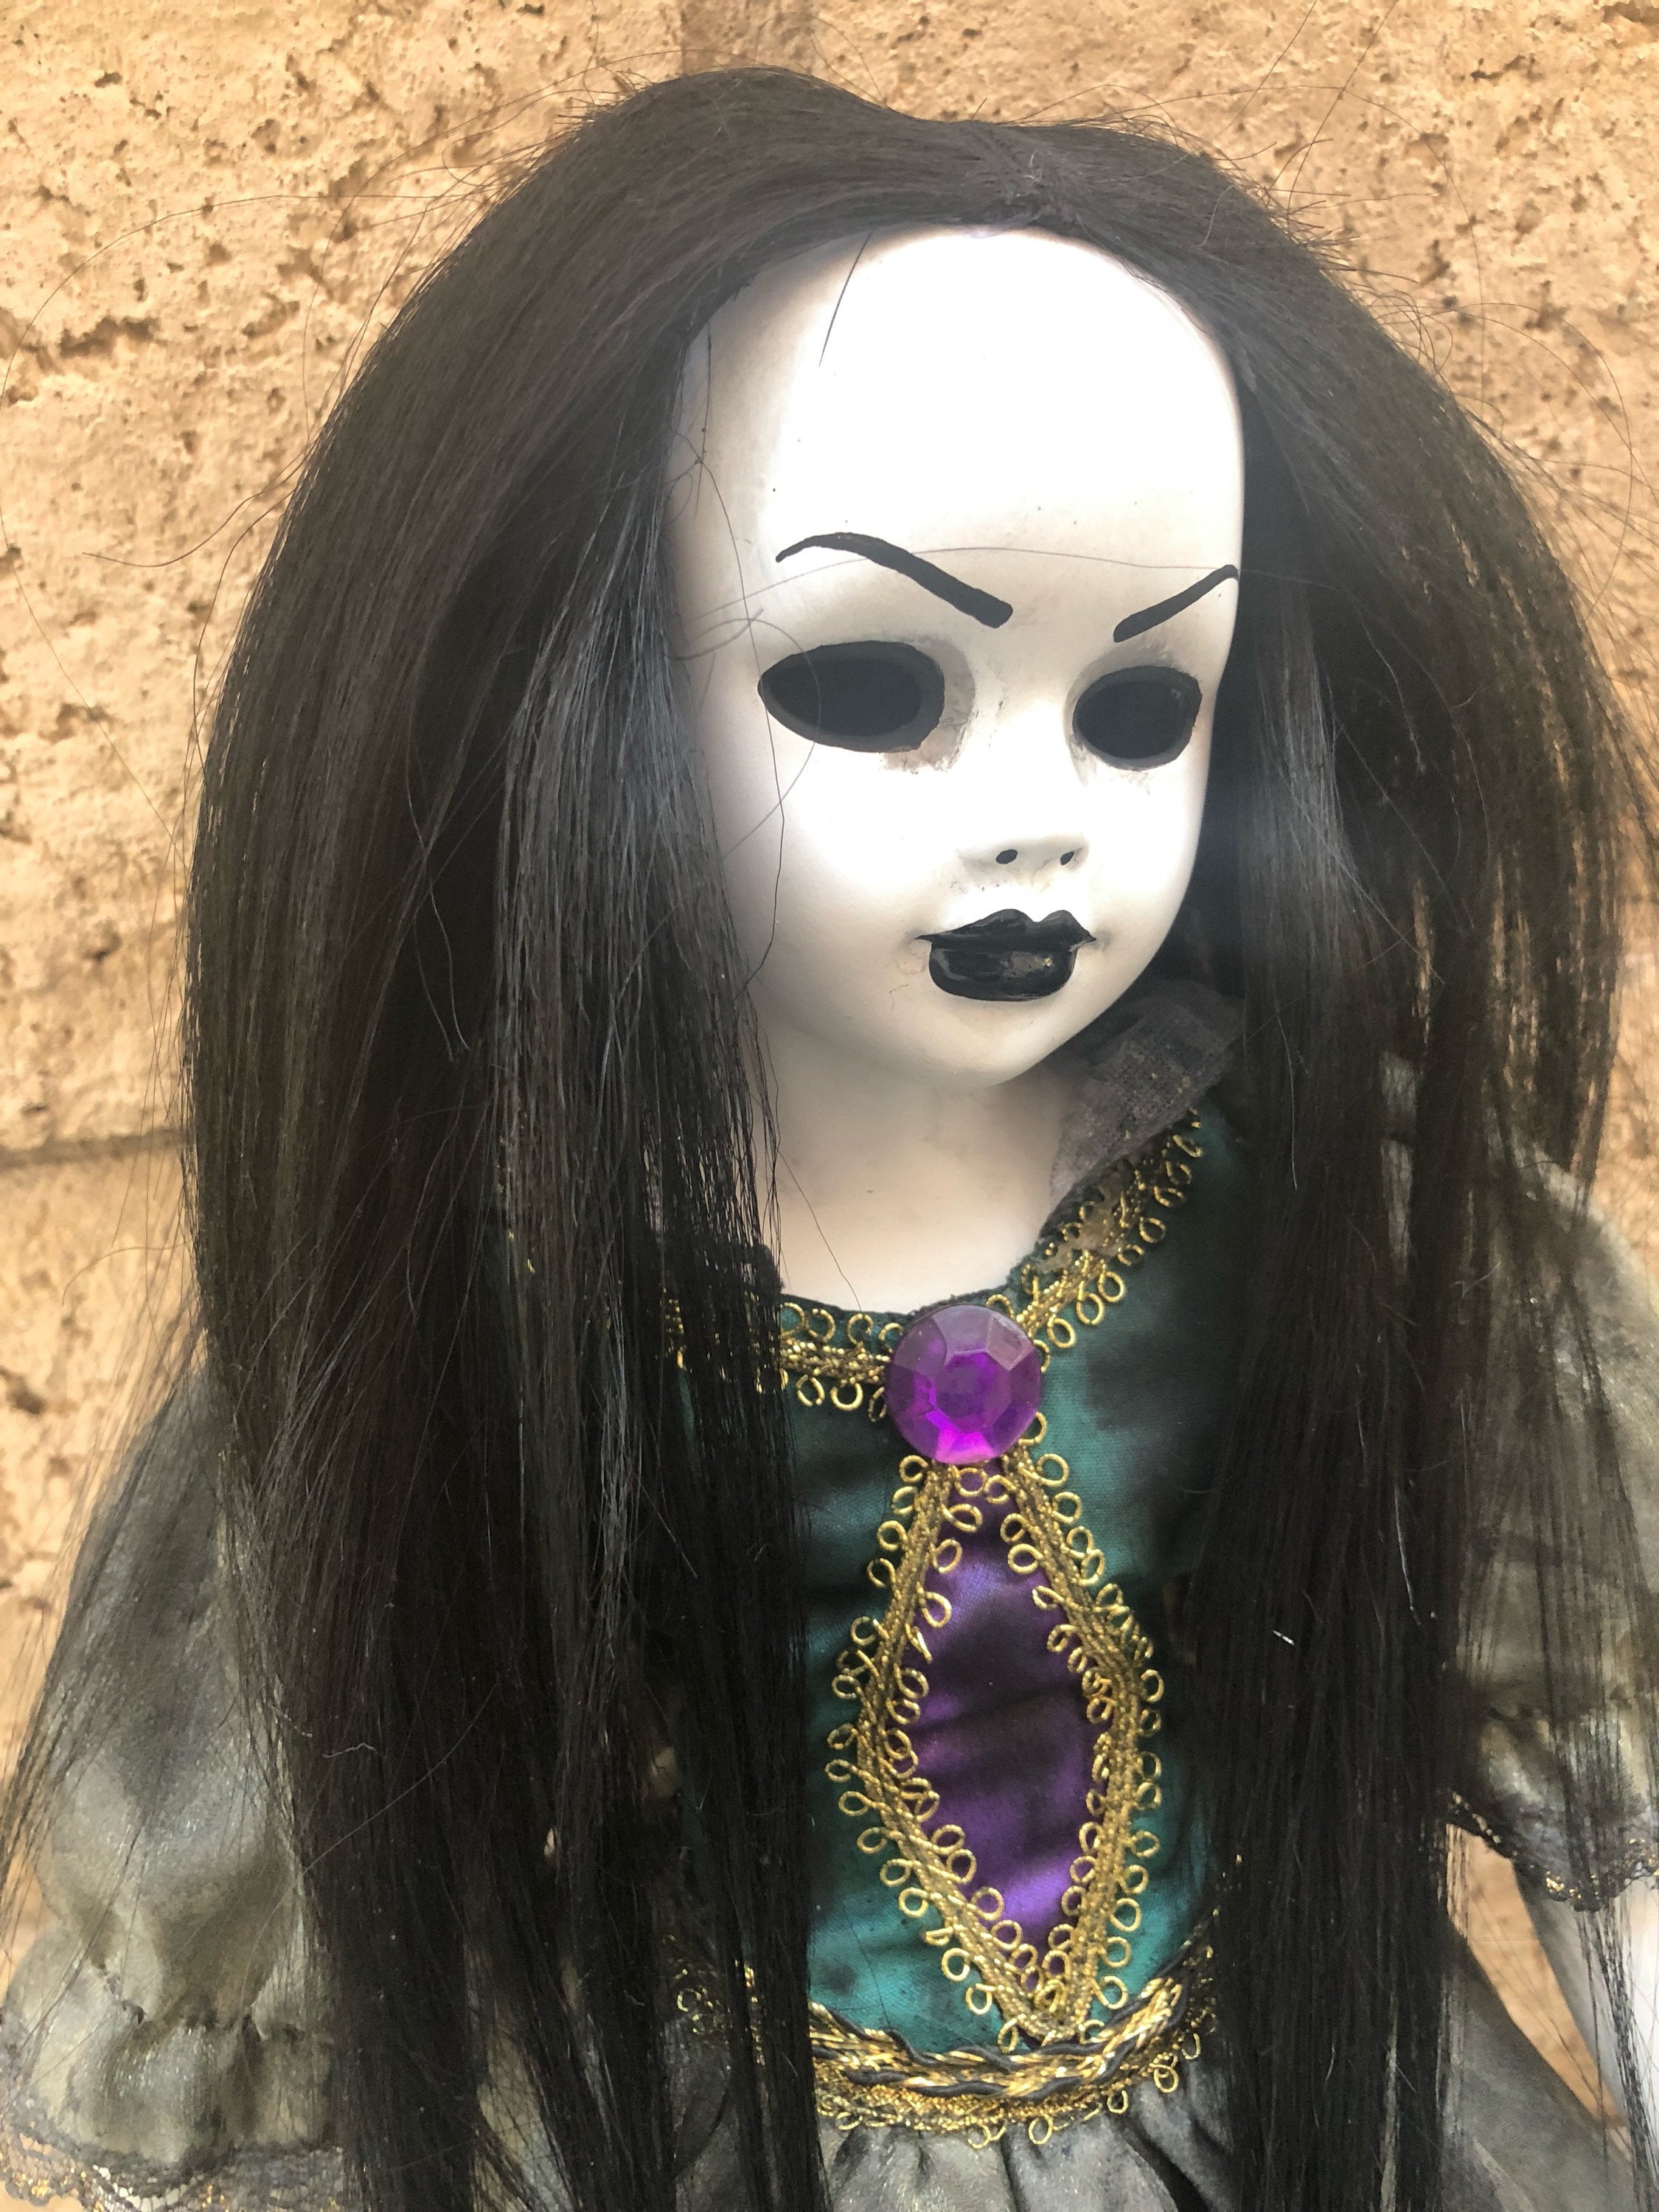 A Creepy Haunted Doll That Aged, and One with Growing Hair - Journalnews